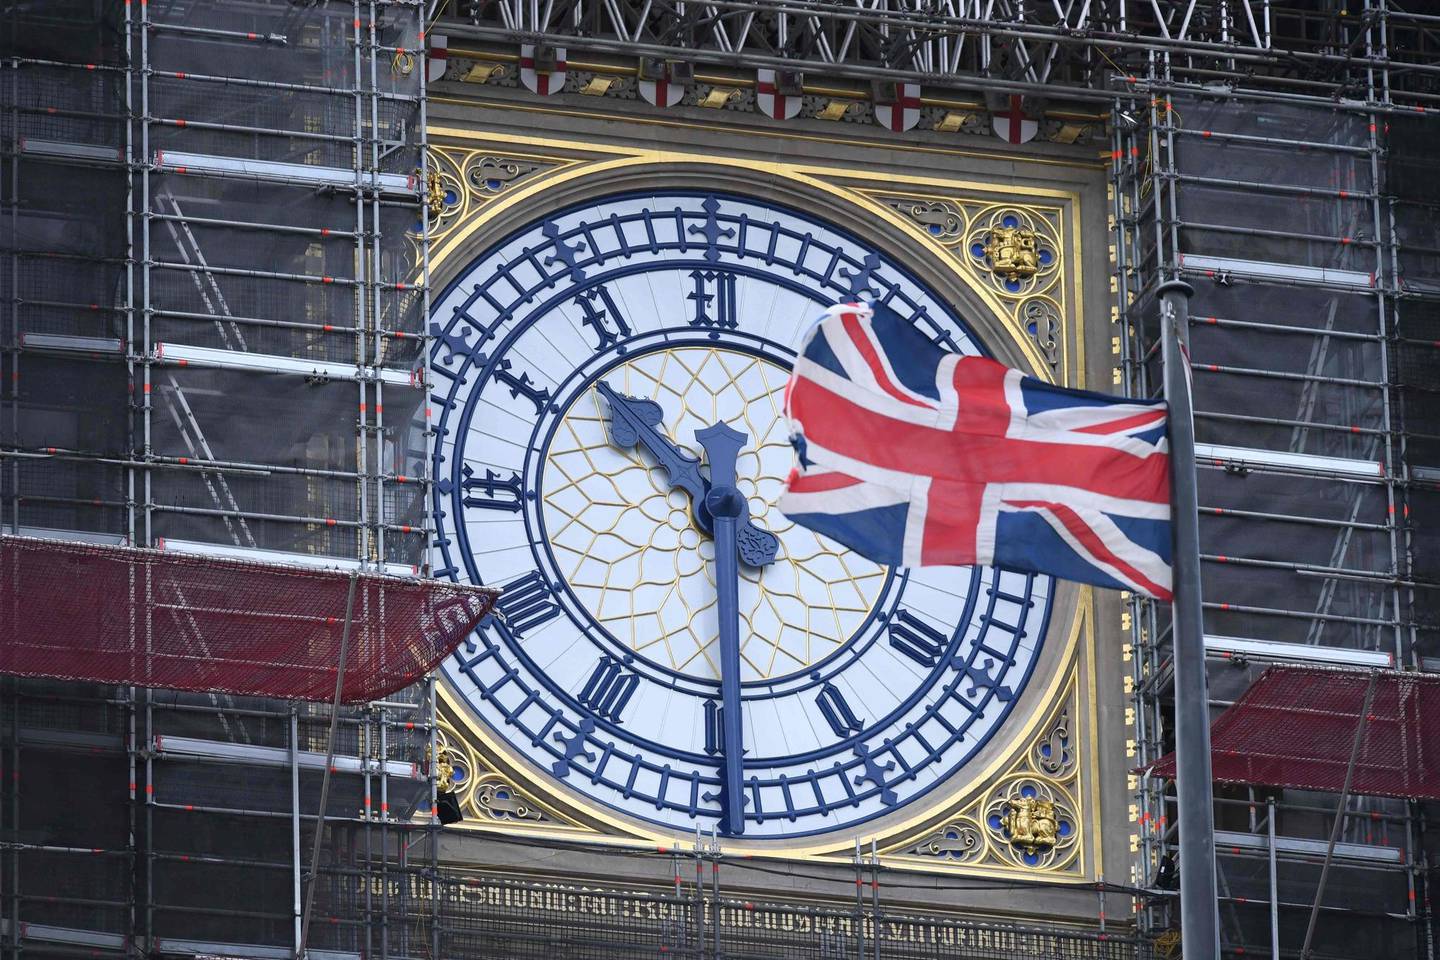 The Union flag flutters near the clockface of Big Ben during ongoing renovations to the Tower and the Houses of Parliament, in central London on January 17, 2020. (Photo by DANIEL LEAL-OLIVAS / AFP)